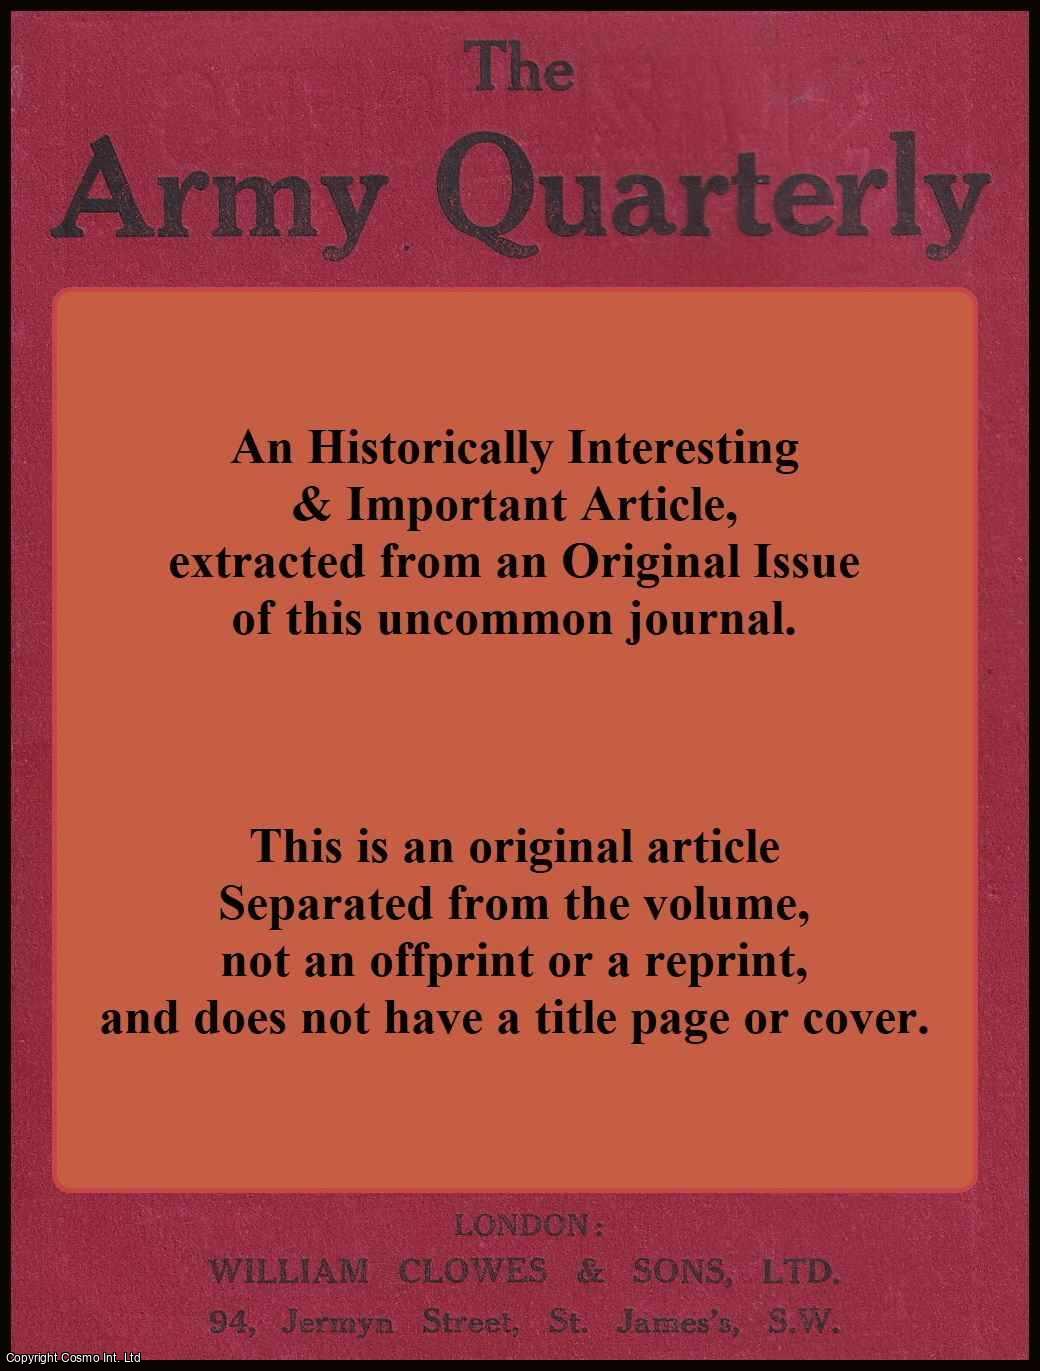 Translated by Arthur John Butler - The Memoirs, Part 1, of Baron de Marbot, Lieutentant-General of the French Army. An original article from the Army Quarterly, 1930.